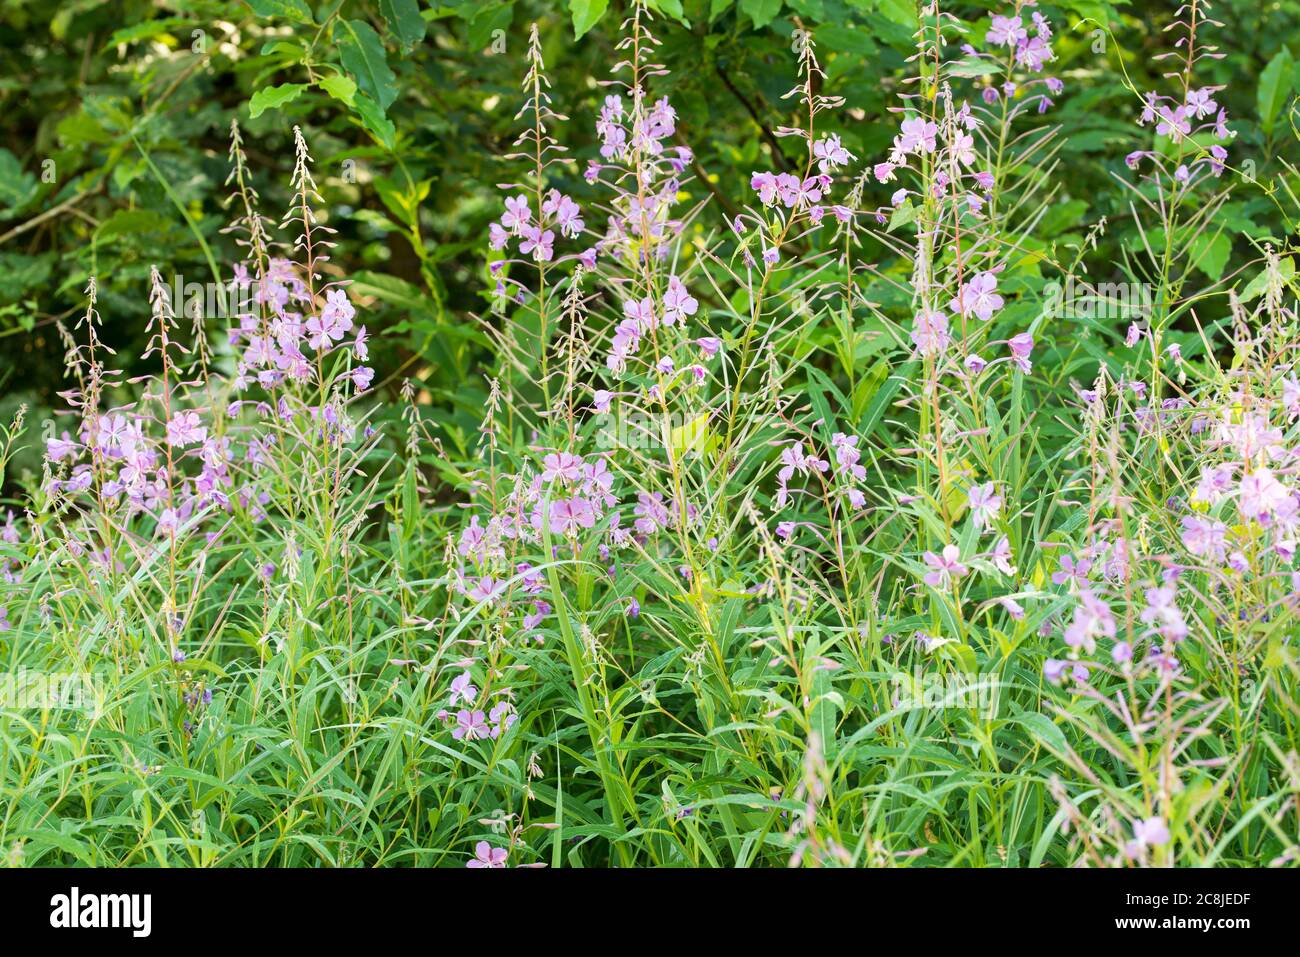 Chamaenerion angustifolium, fireweed, great willowherb flowers in meadow macro selective focus Stock Photo